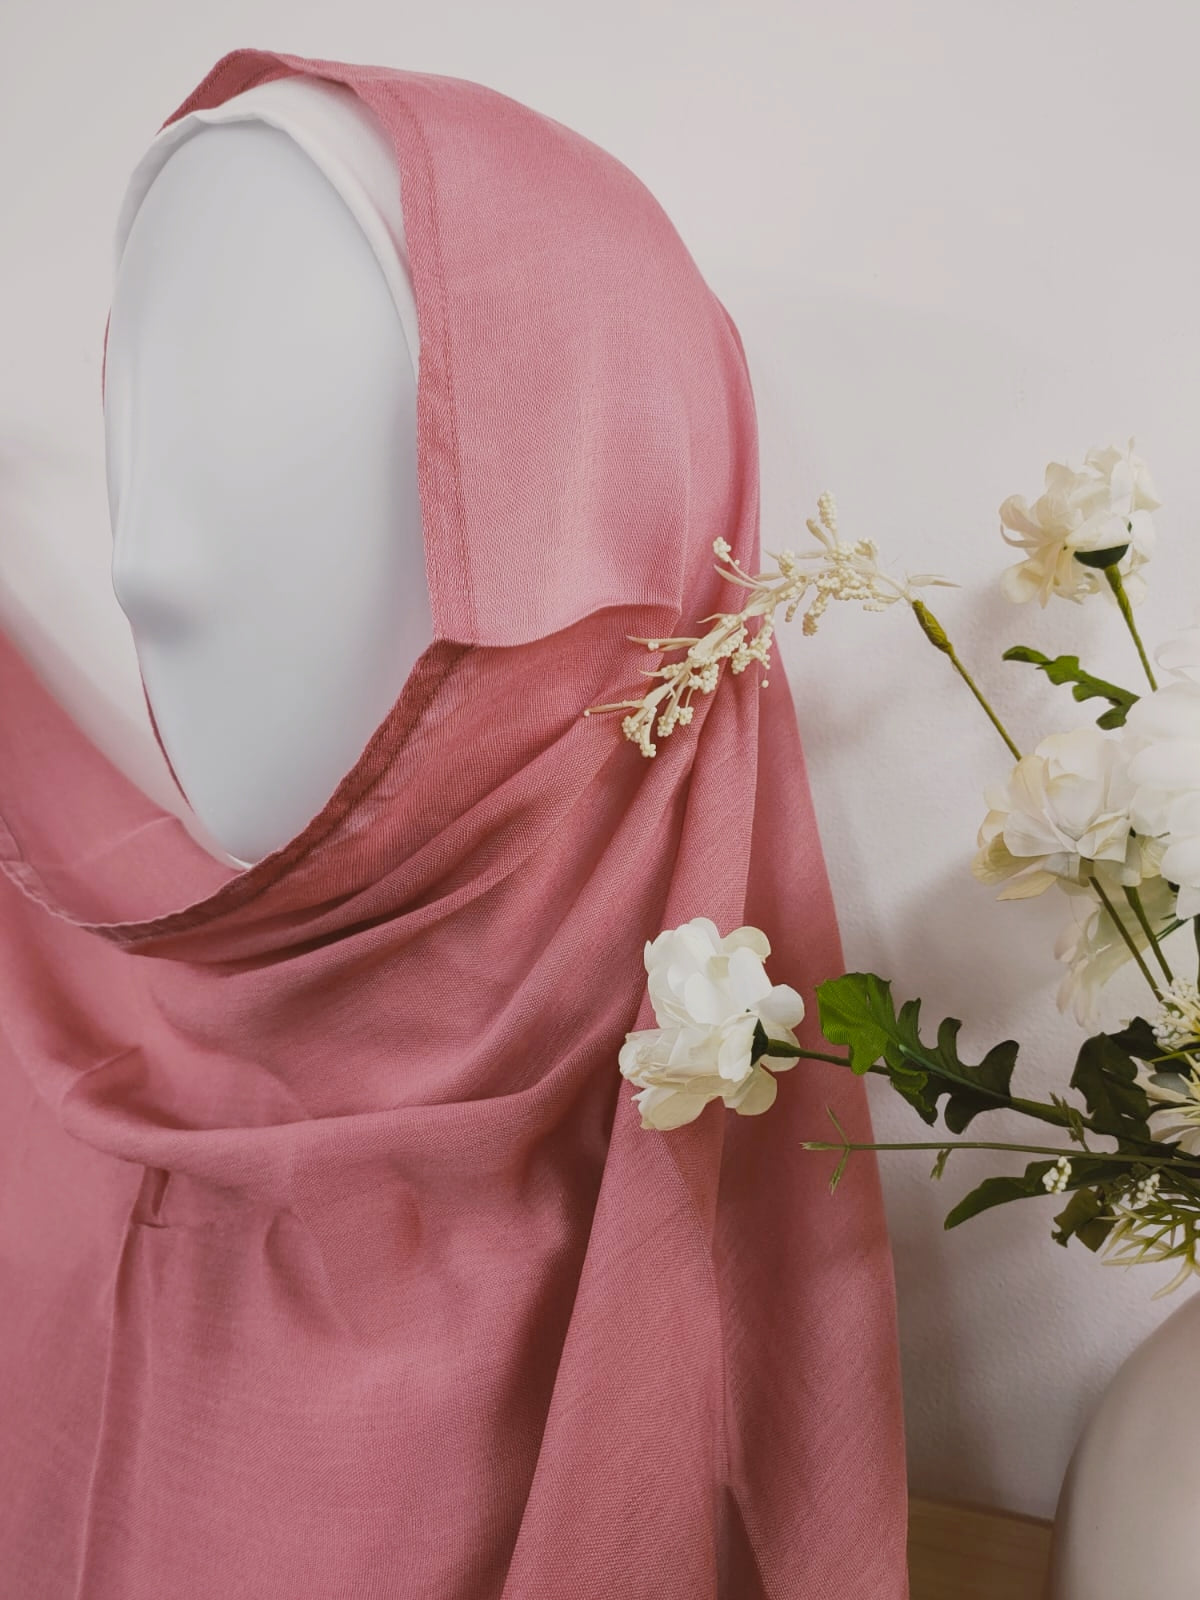 Shop now for our Modal Hijab in Dusty Pink, a captivating addition to your hijab collection, exclusively available at Hikmah Boutique! Meticulously crafted from premium modal fabric, known for its softness and breathability, this hijab ensures comfort and style that lasts all day. Based in Australia, Deliver Worldwide.